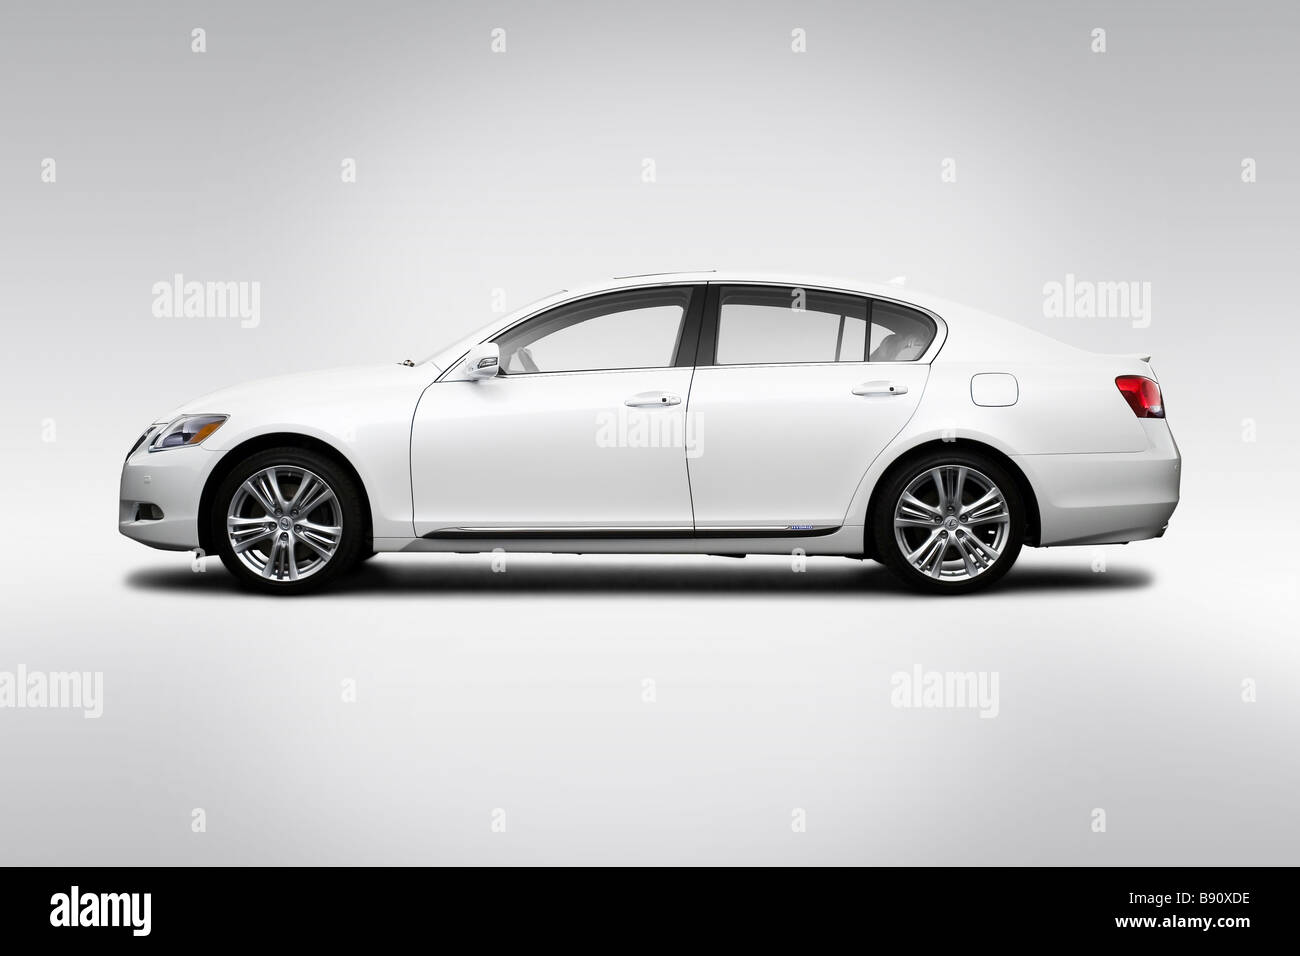 2009 Lexus Gs Hybrid Gs450h In White Drivers Side Profile Stock Photo Alamy